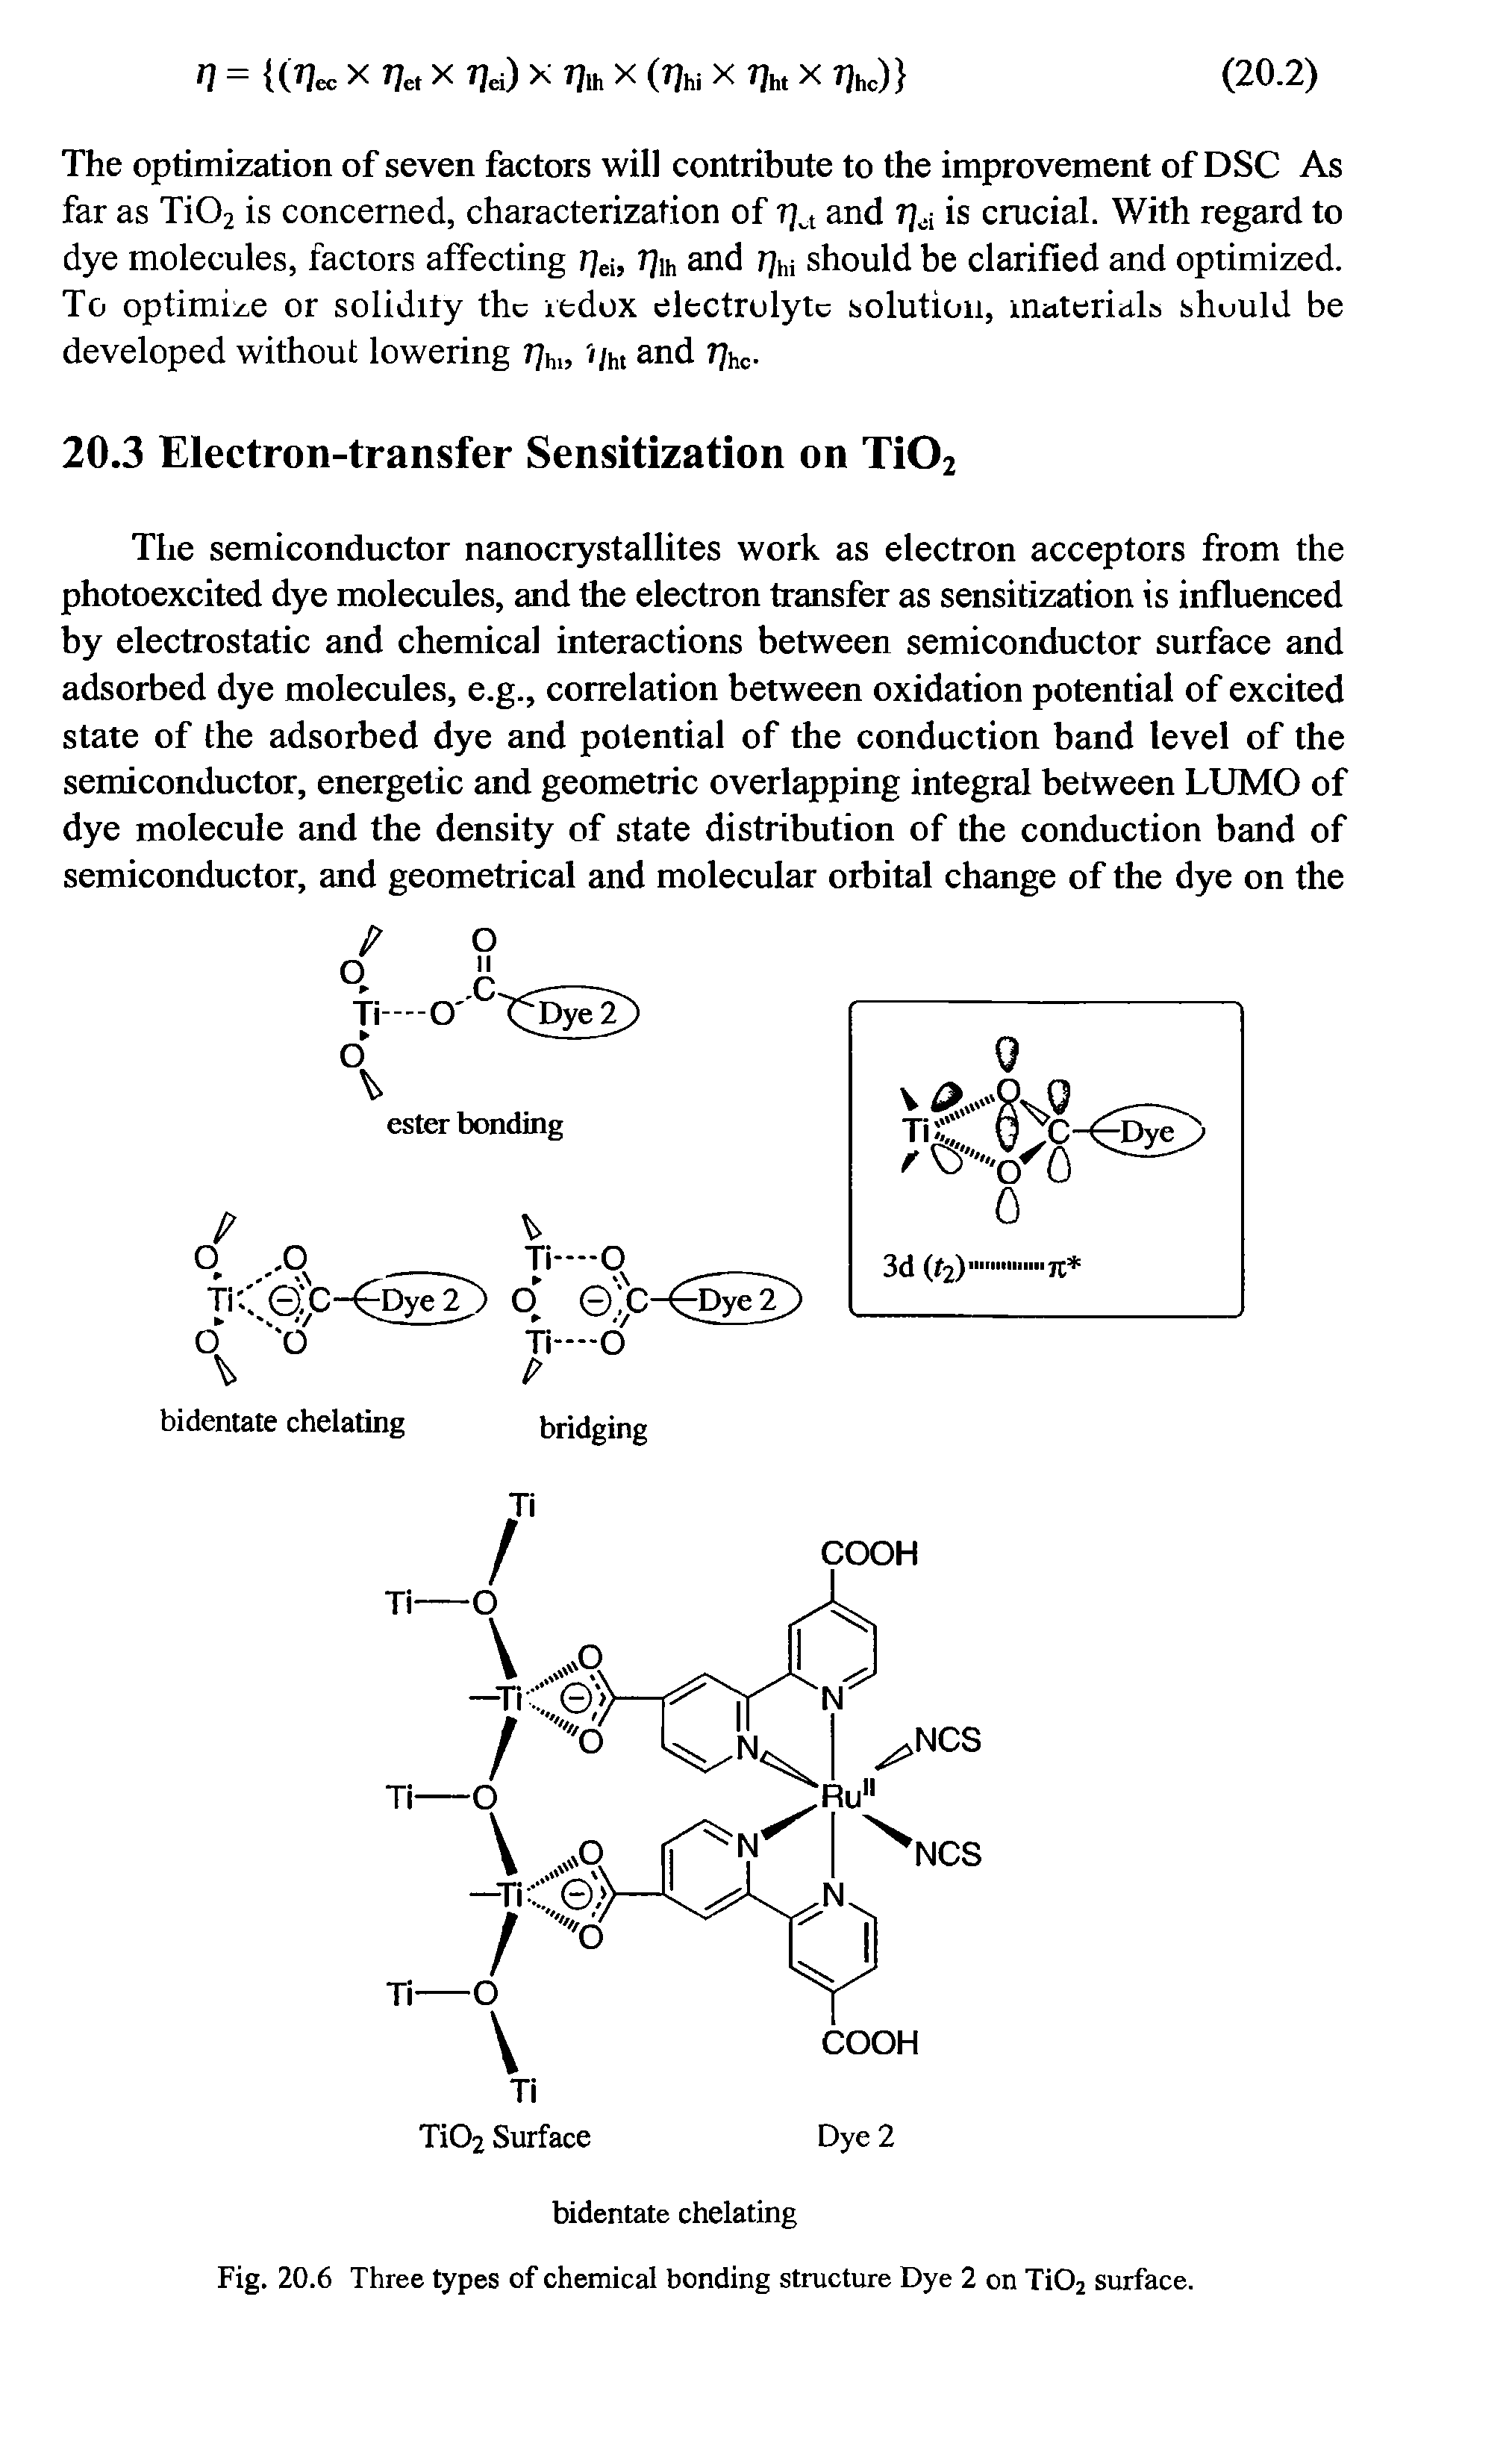 Fig. 20.6 Three types of chemical bonding structure Dye 2 on Ti02 surface.